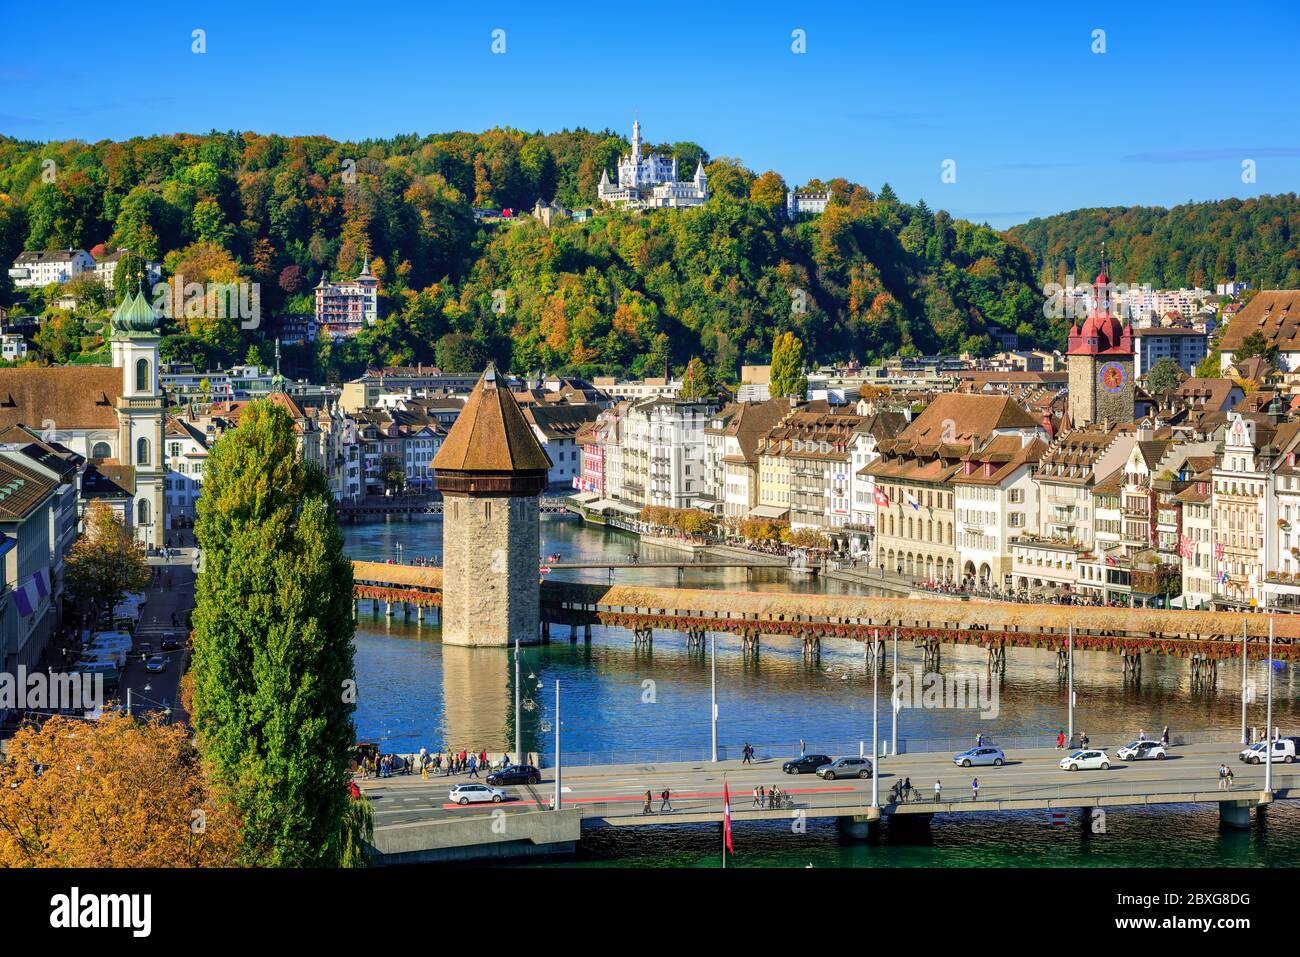 Lucerne city, Switzerland, aerial view of wooden Chapel bridge and of historical Old town famous for its medieval architecture Stock Photo